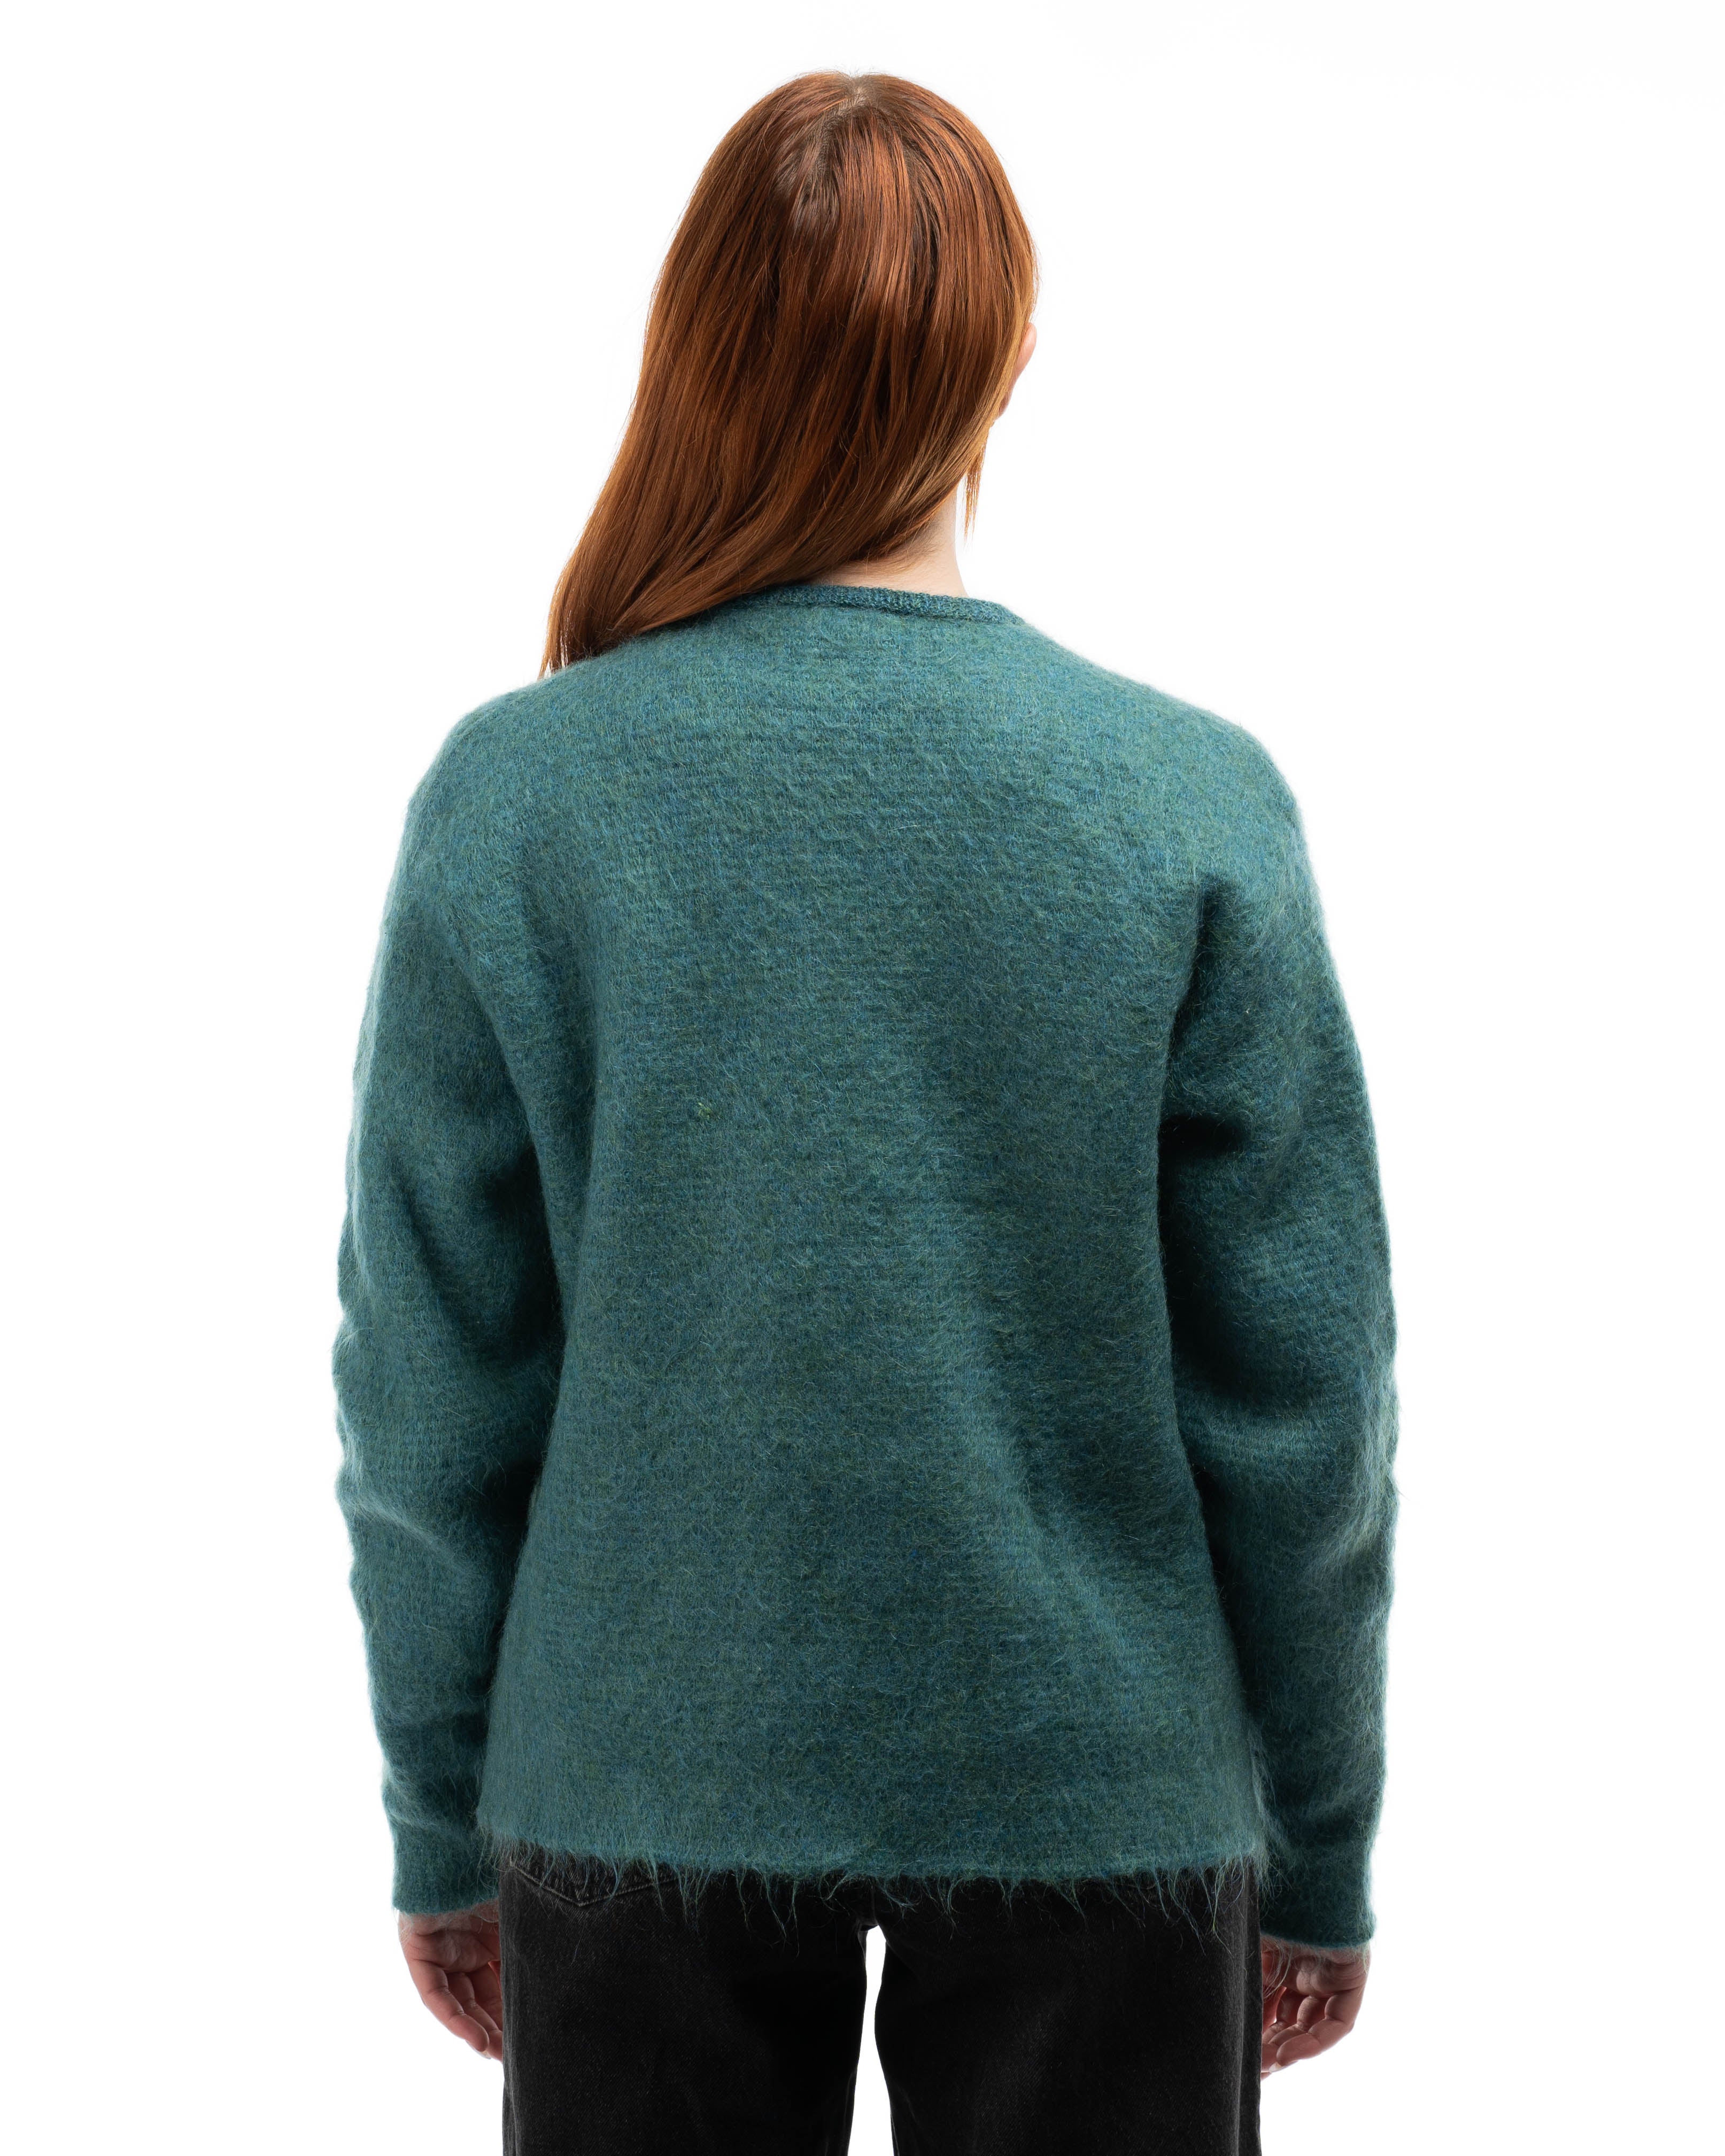 60’s Mohair Cardigan - Small